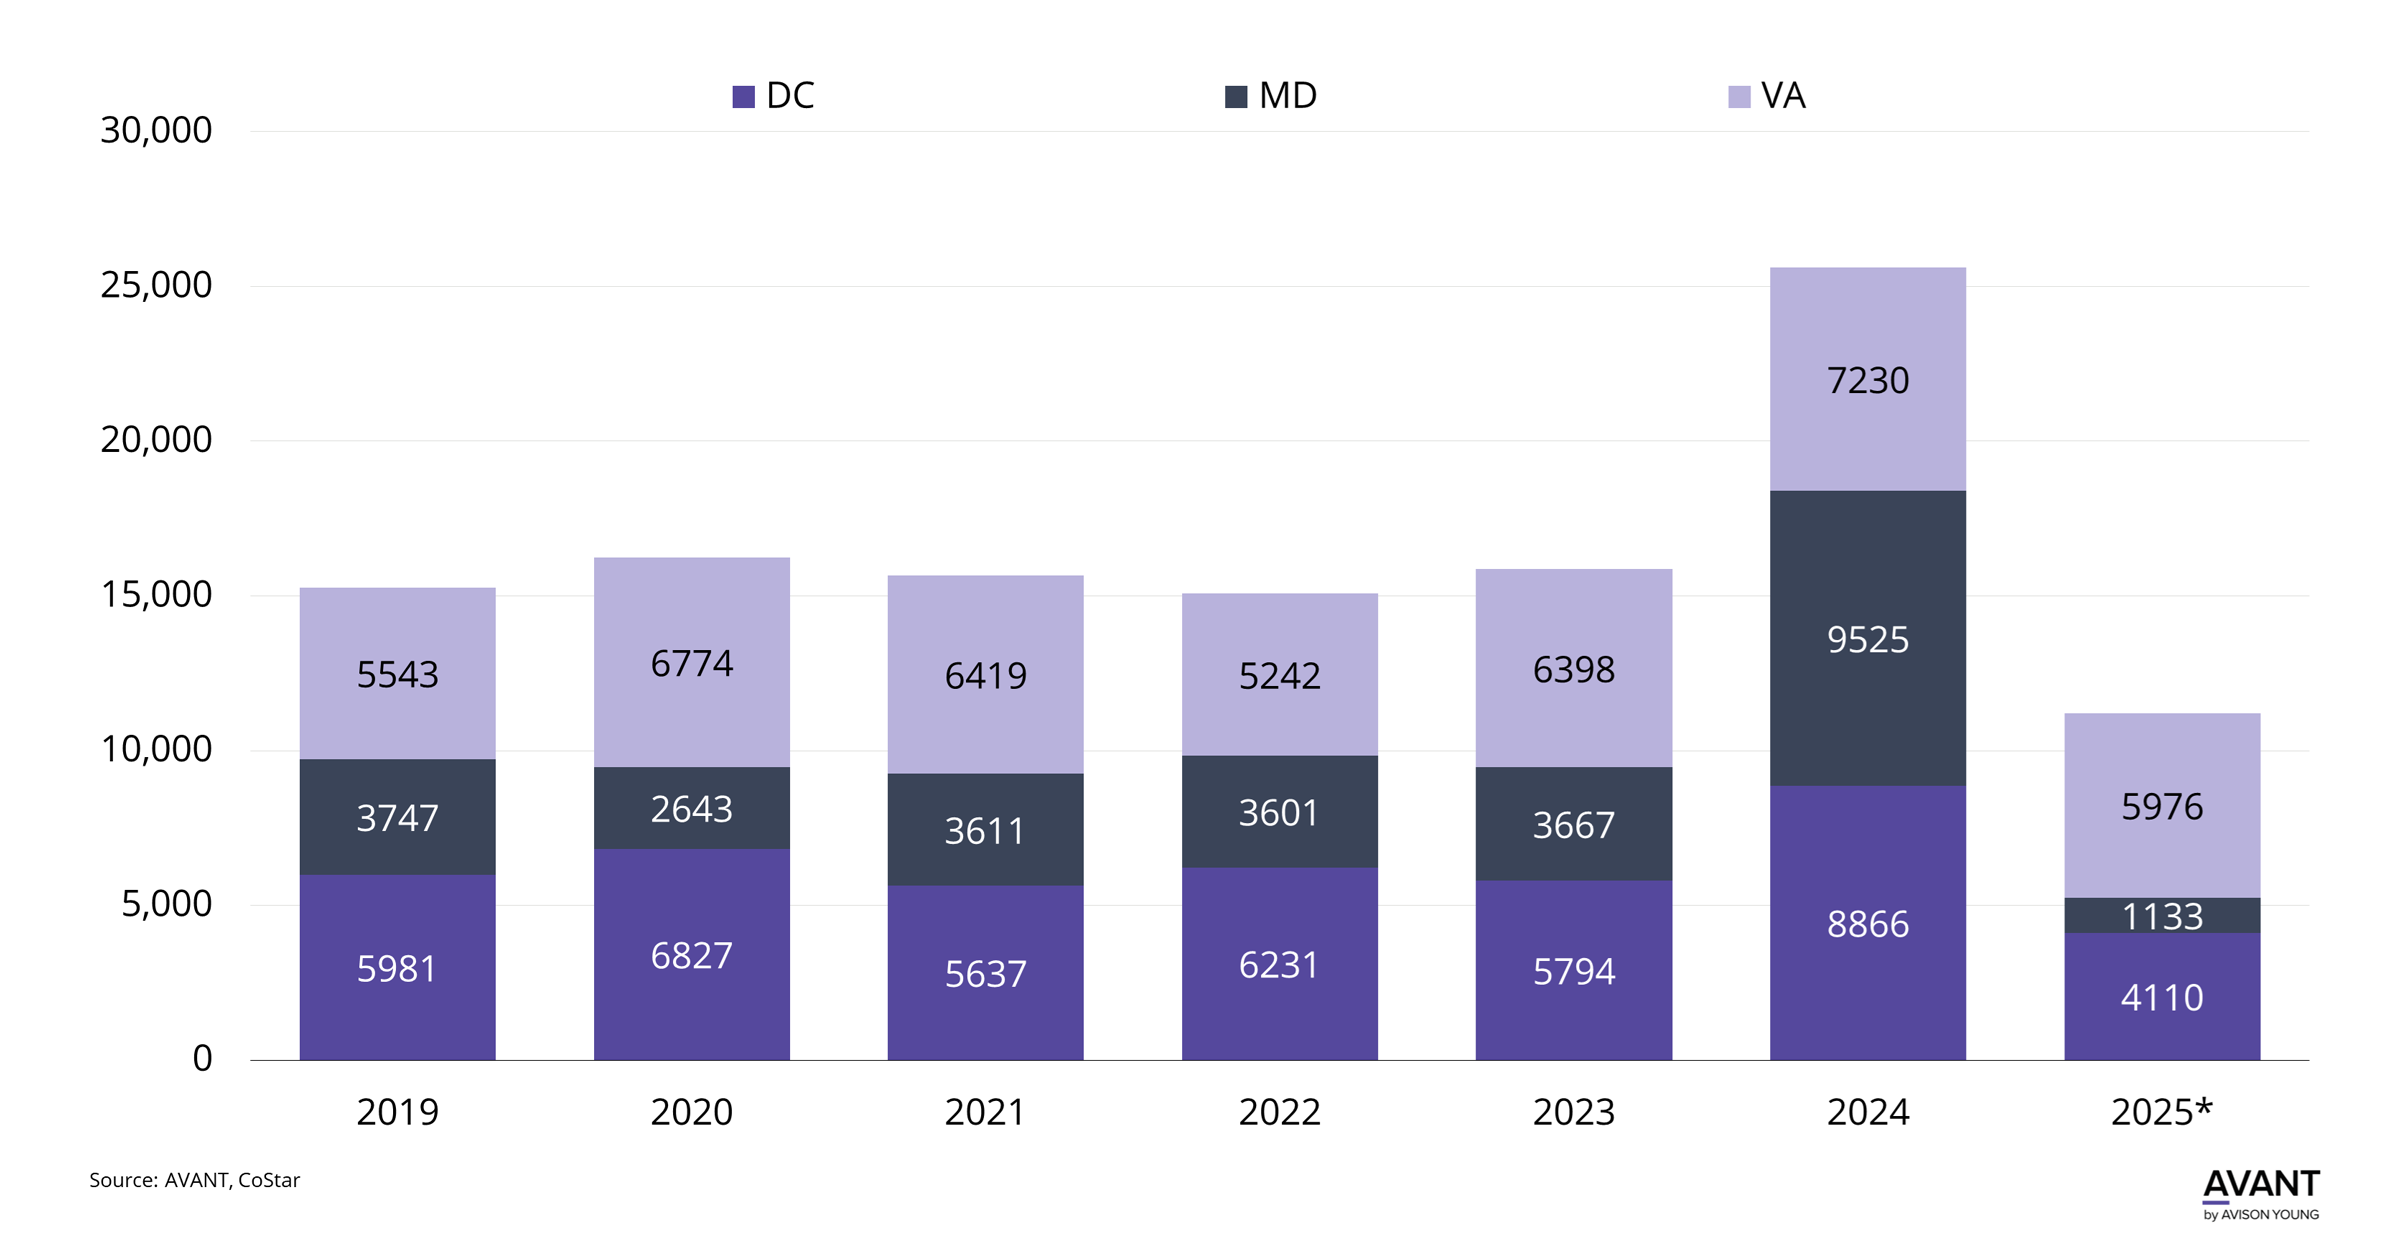 Bar graph comparing multifamily deliveries in DC, Virginia, and Maryland from 2019-2025 (projected)